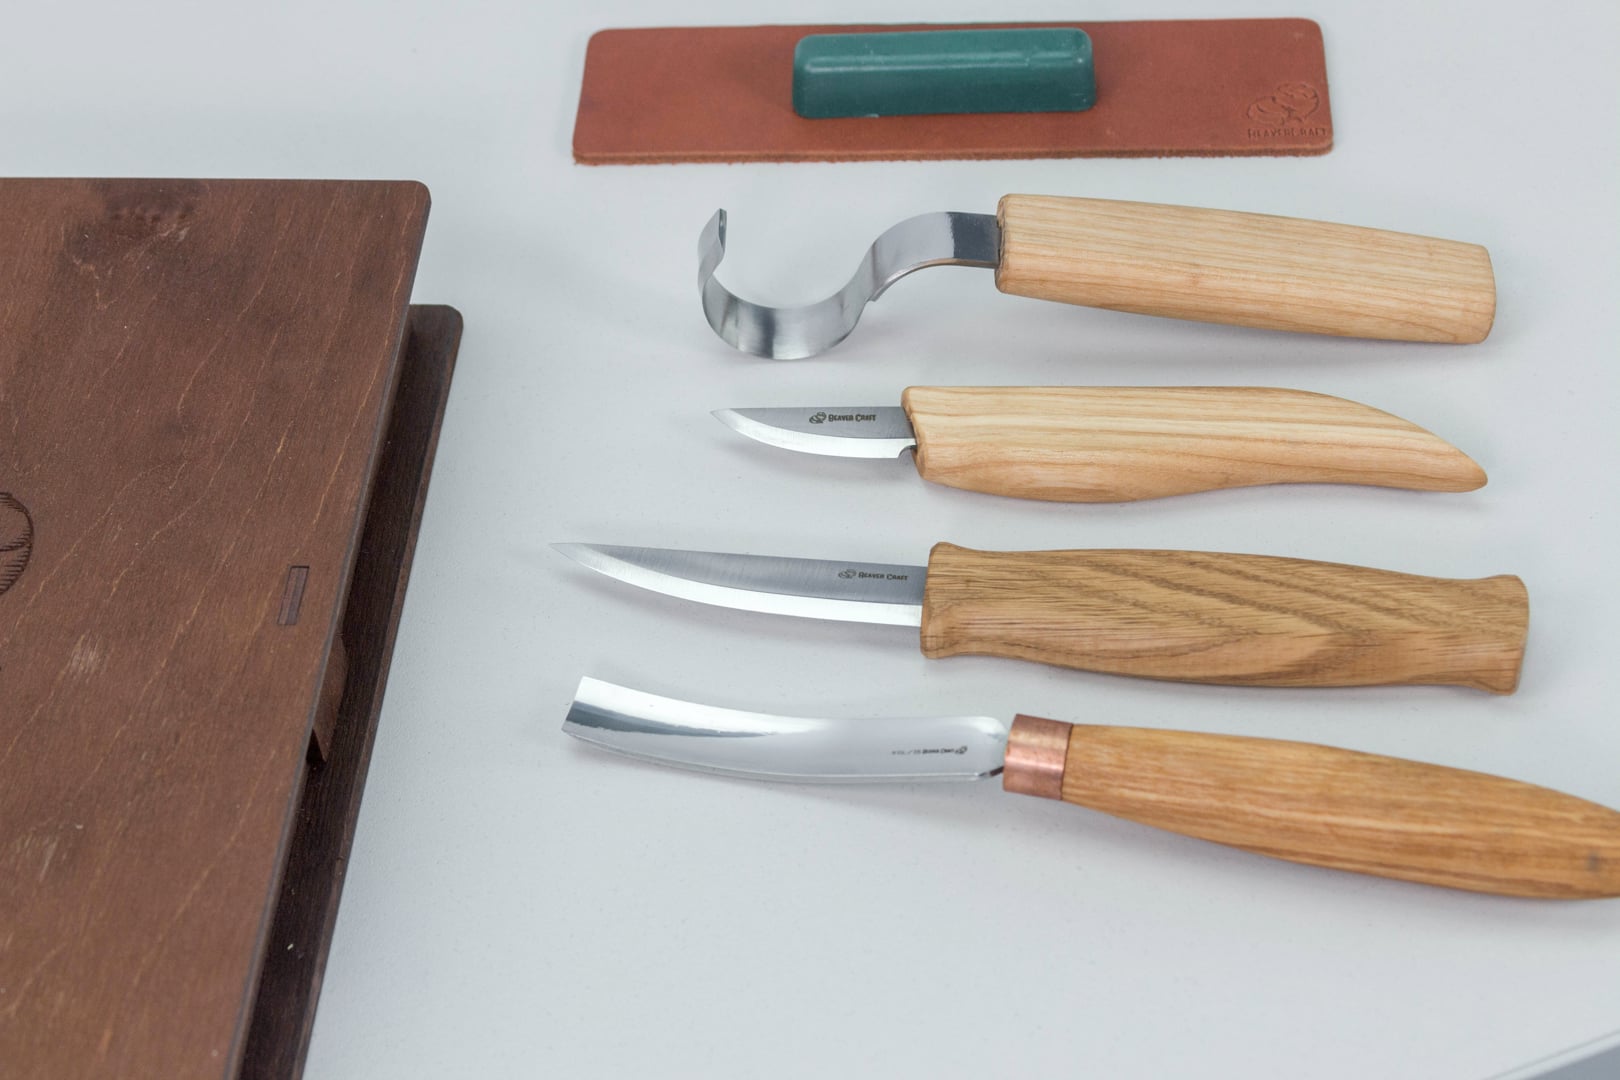 Spoon Carving Knives